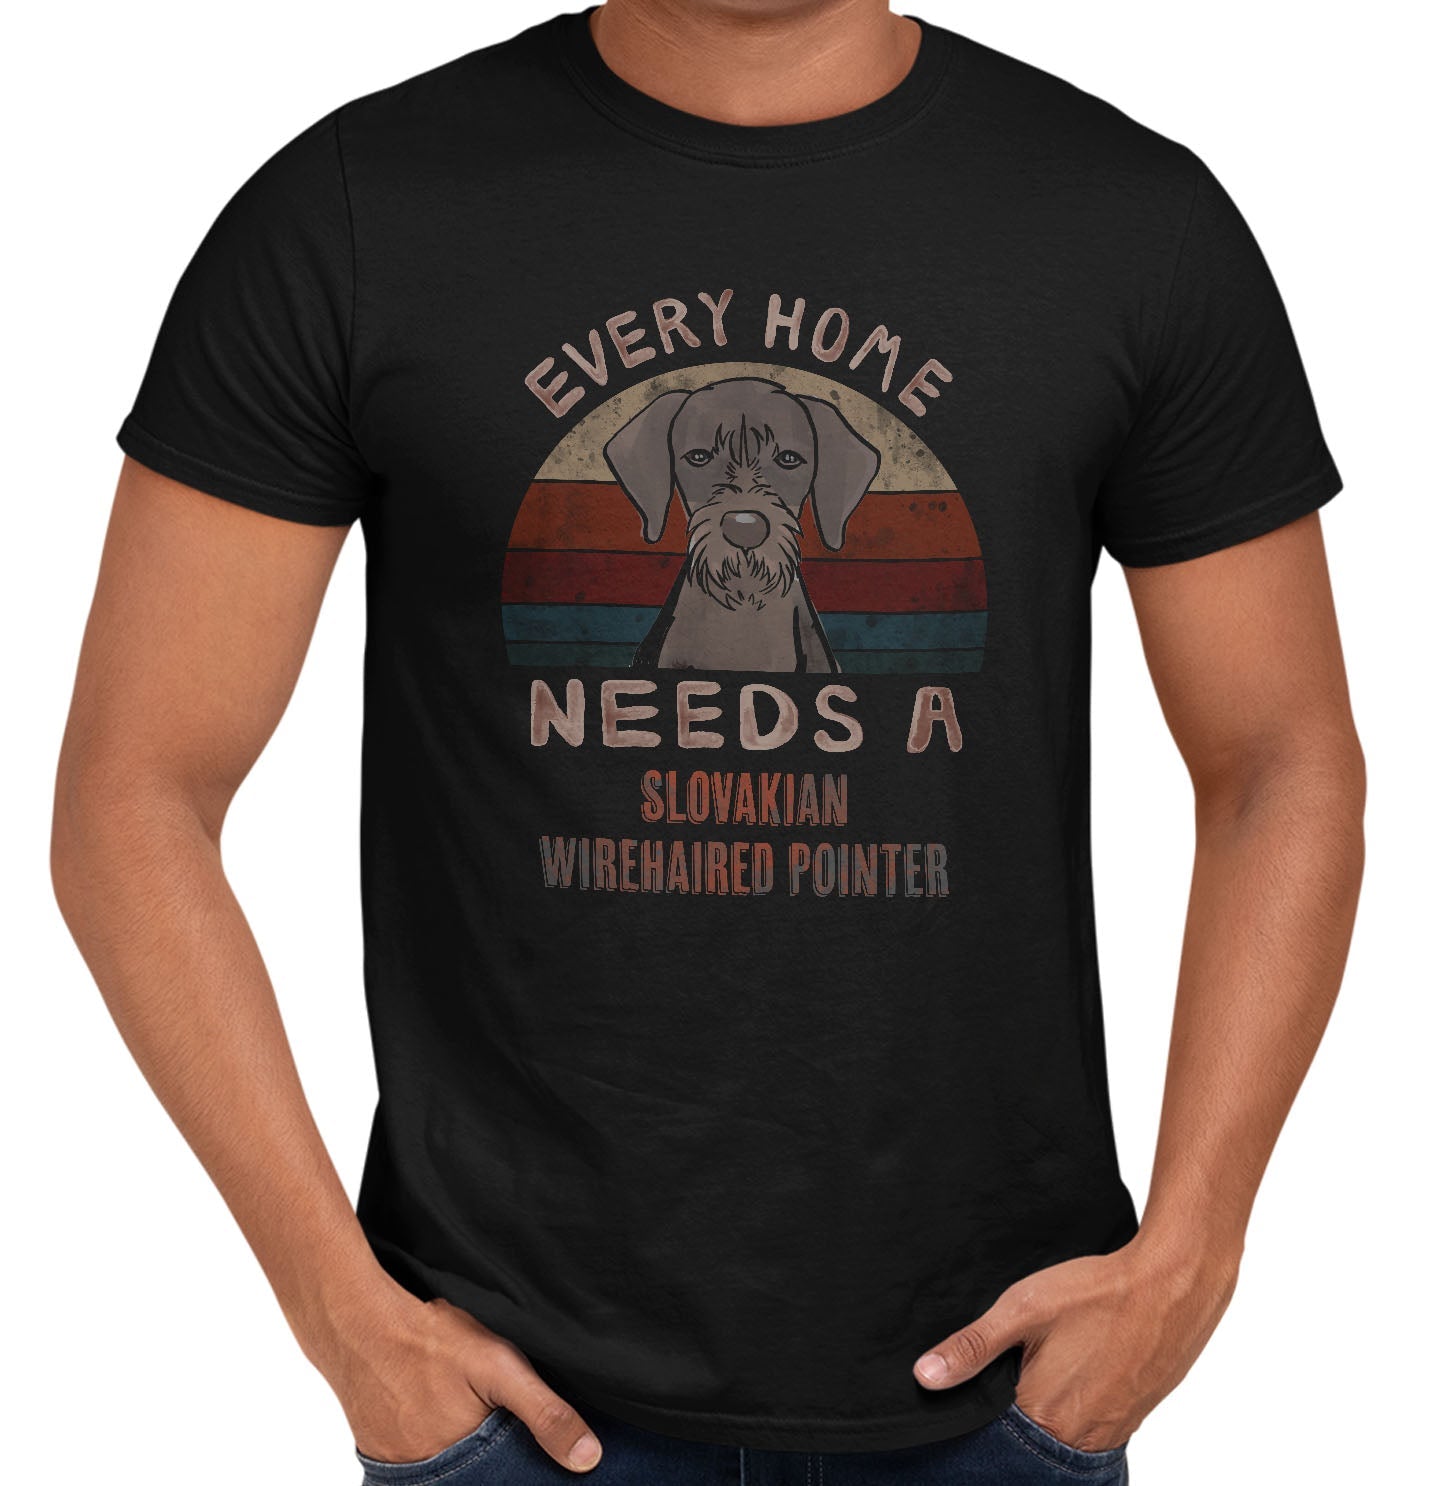 Every Home Needs a Slovakian Wirehaired Pointer - Adult Unisex T-Shirt